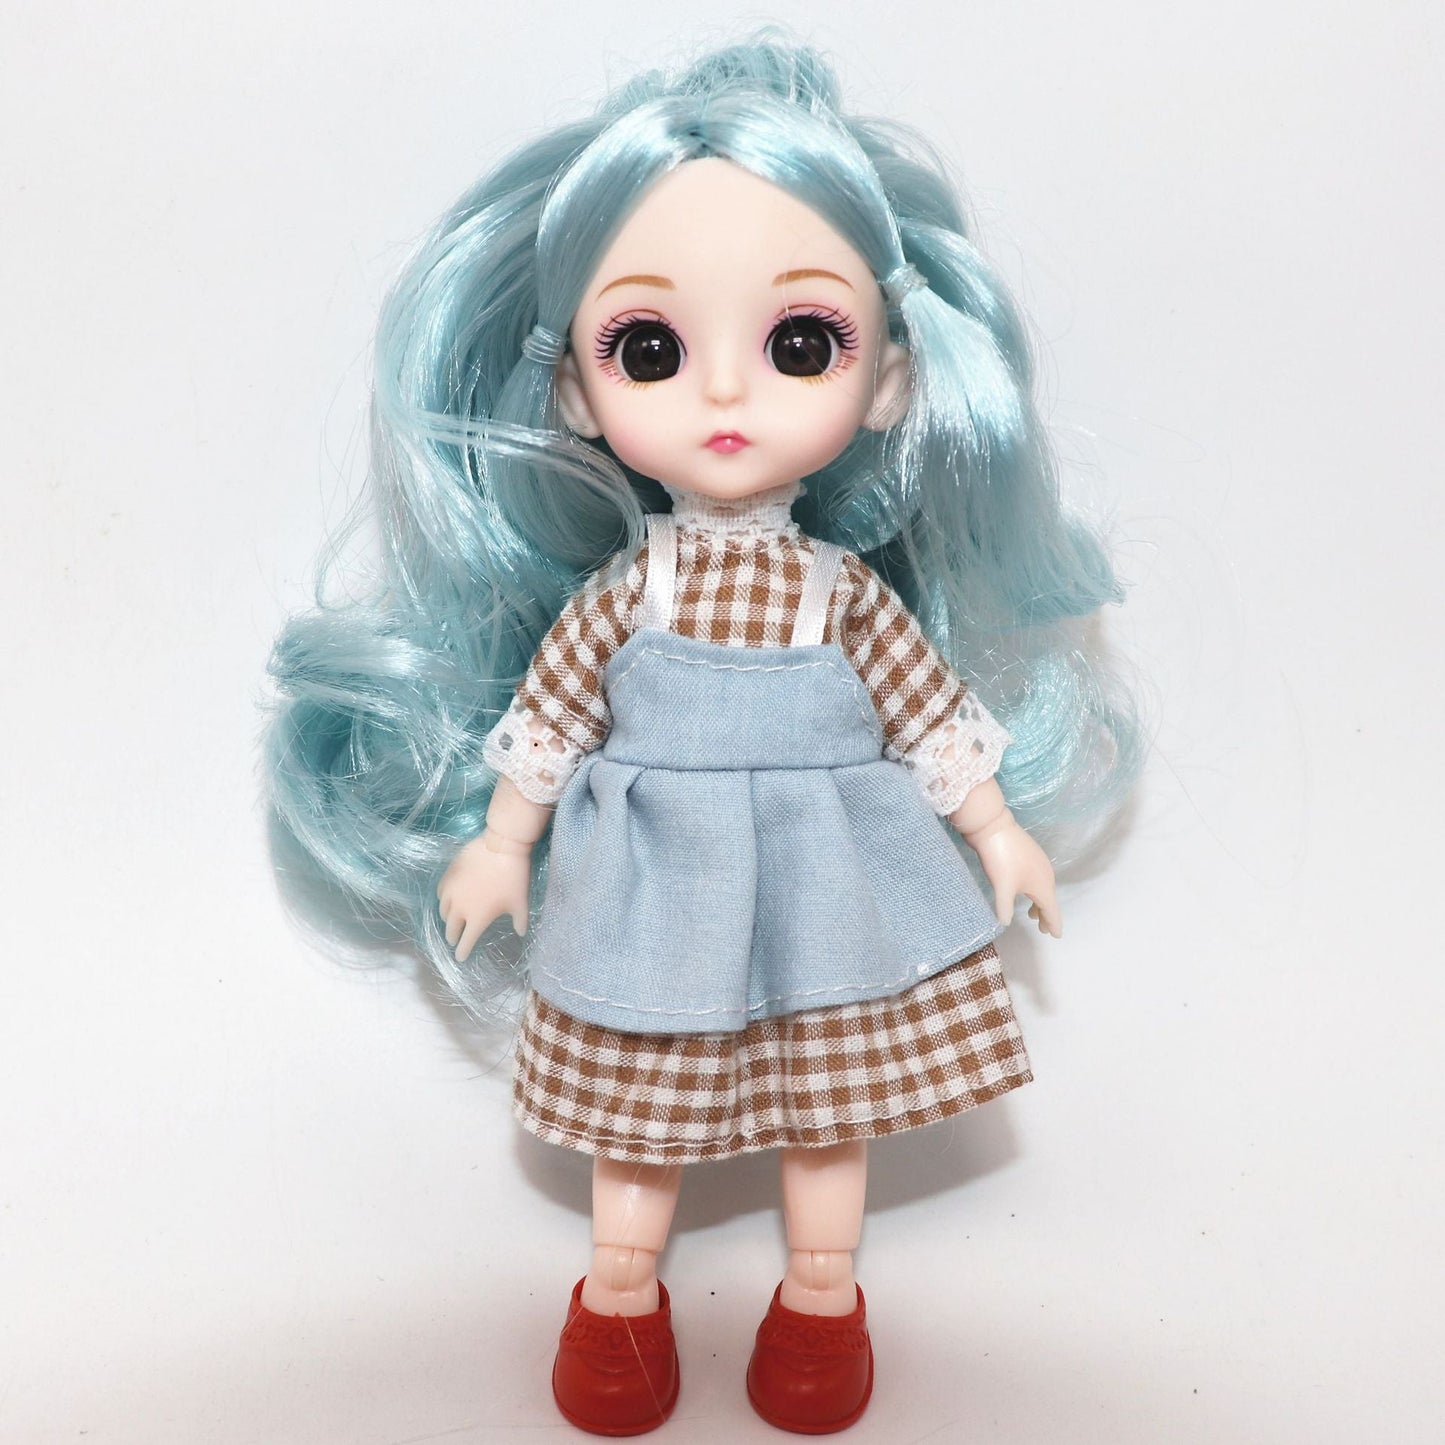 Bjd 16cm Movable Joint Doll with Real 3D Eyes and High-end Fashion Dress - DIY Girl Toy Best Gift Toyland EU Toyland EU